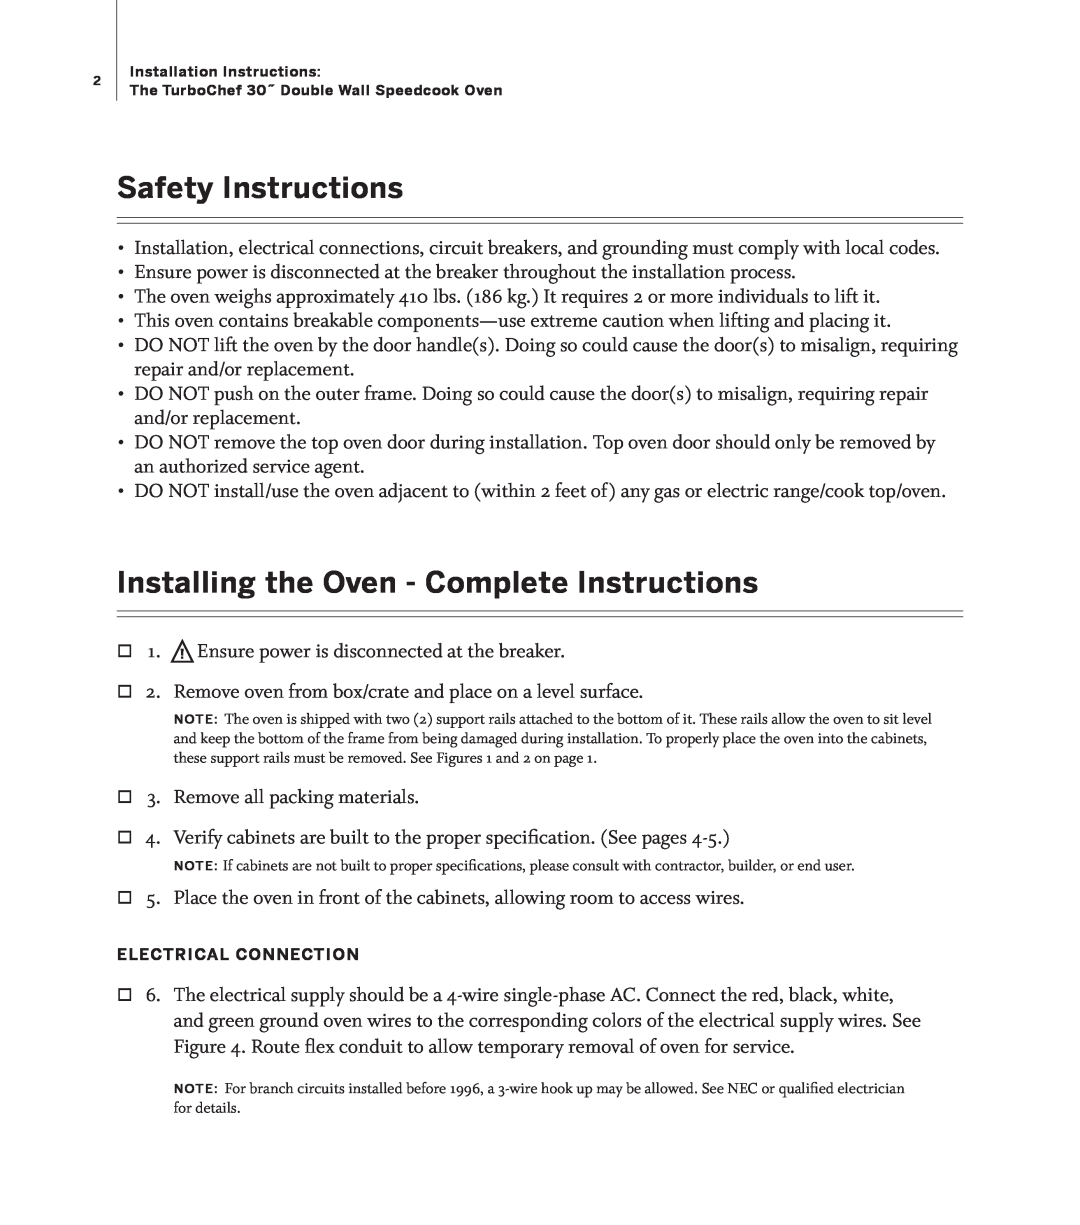 Turbo Chef Technologies TD030* 208 Safety Instructions, Installing the Oven - Complete Instructions 